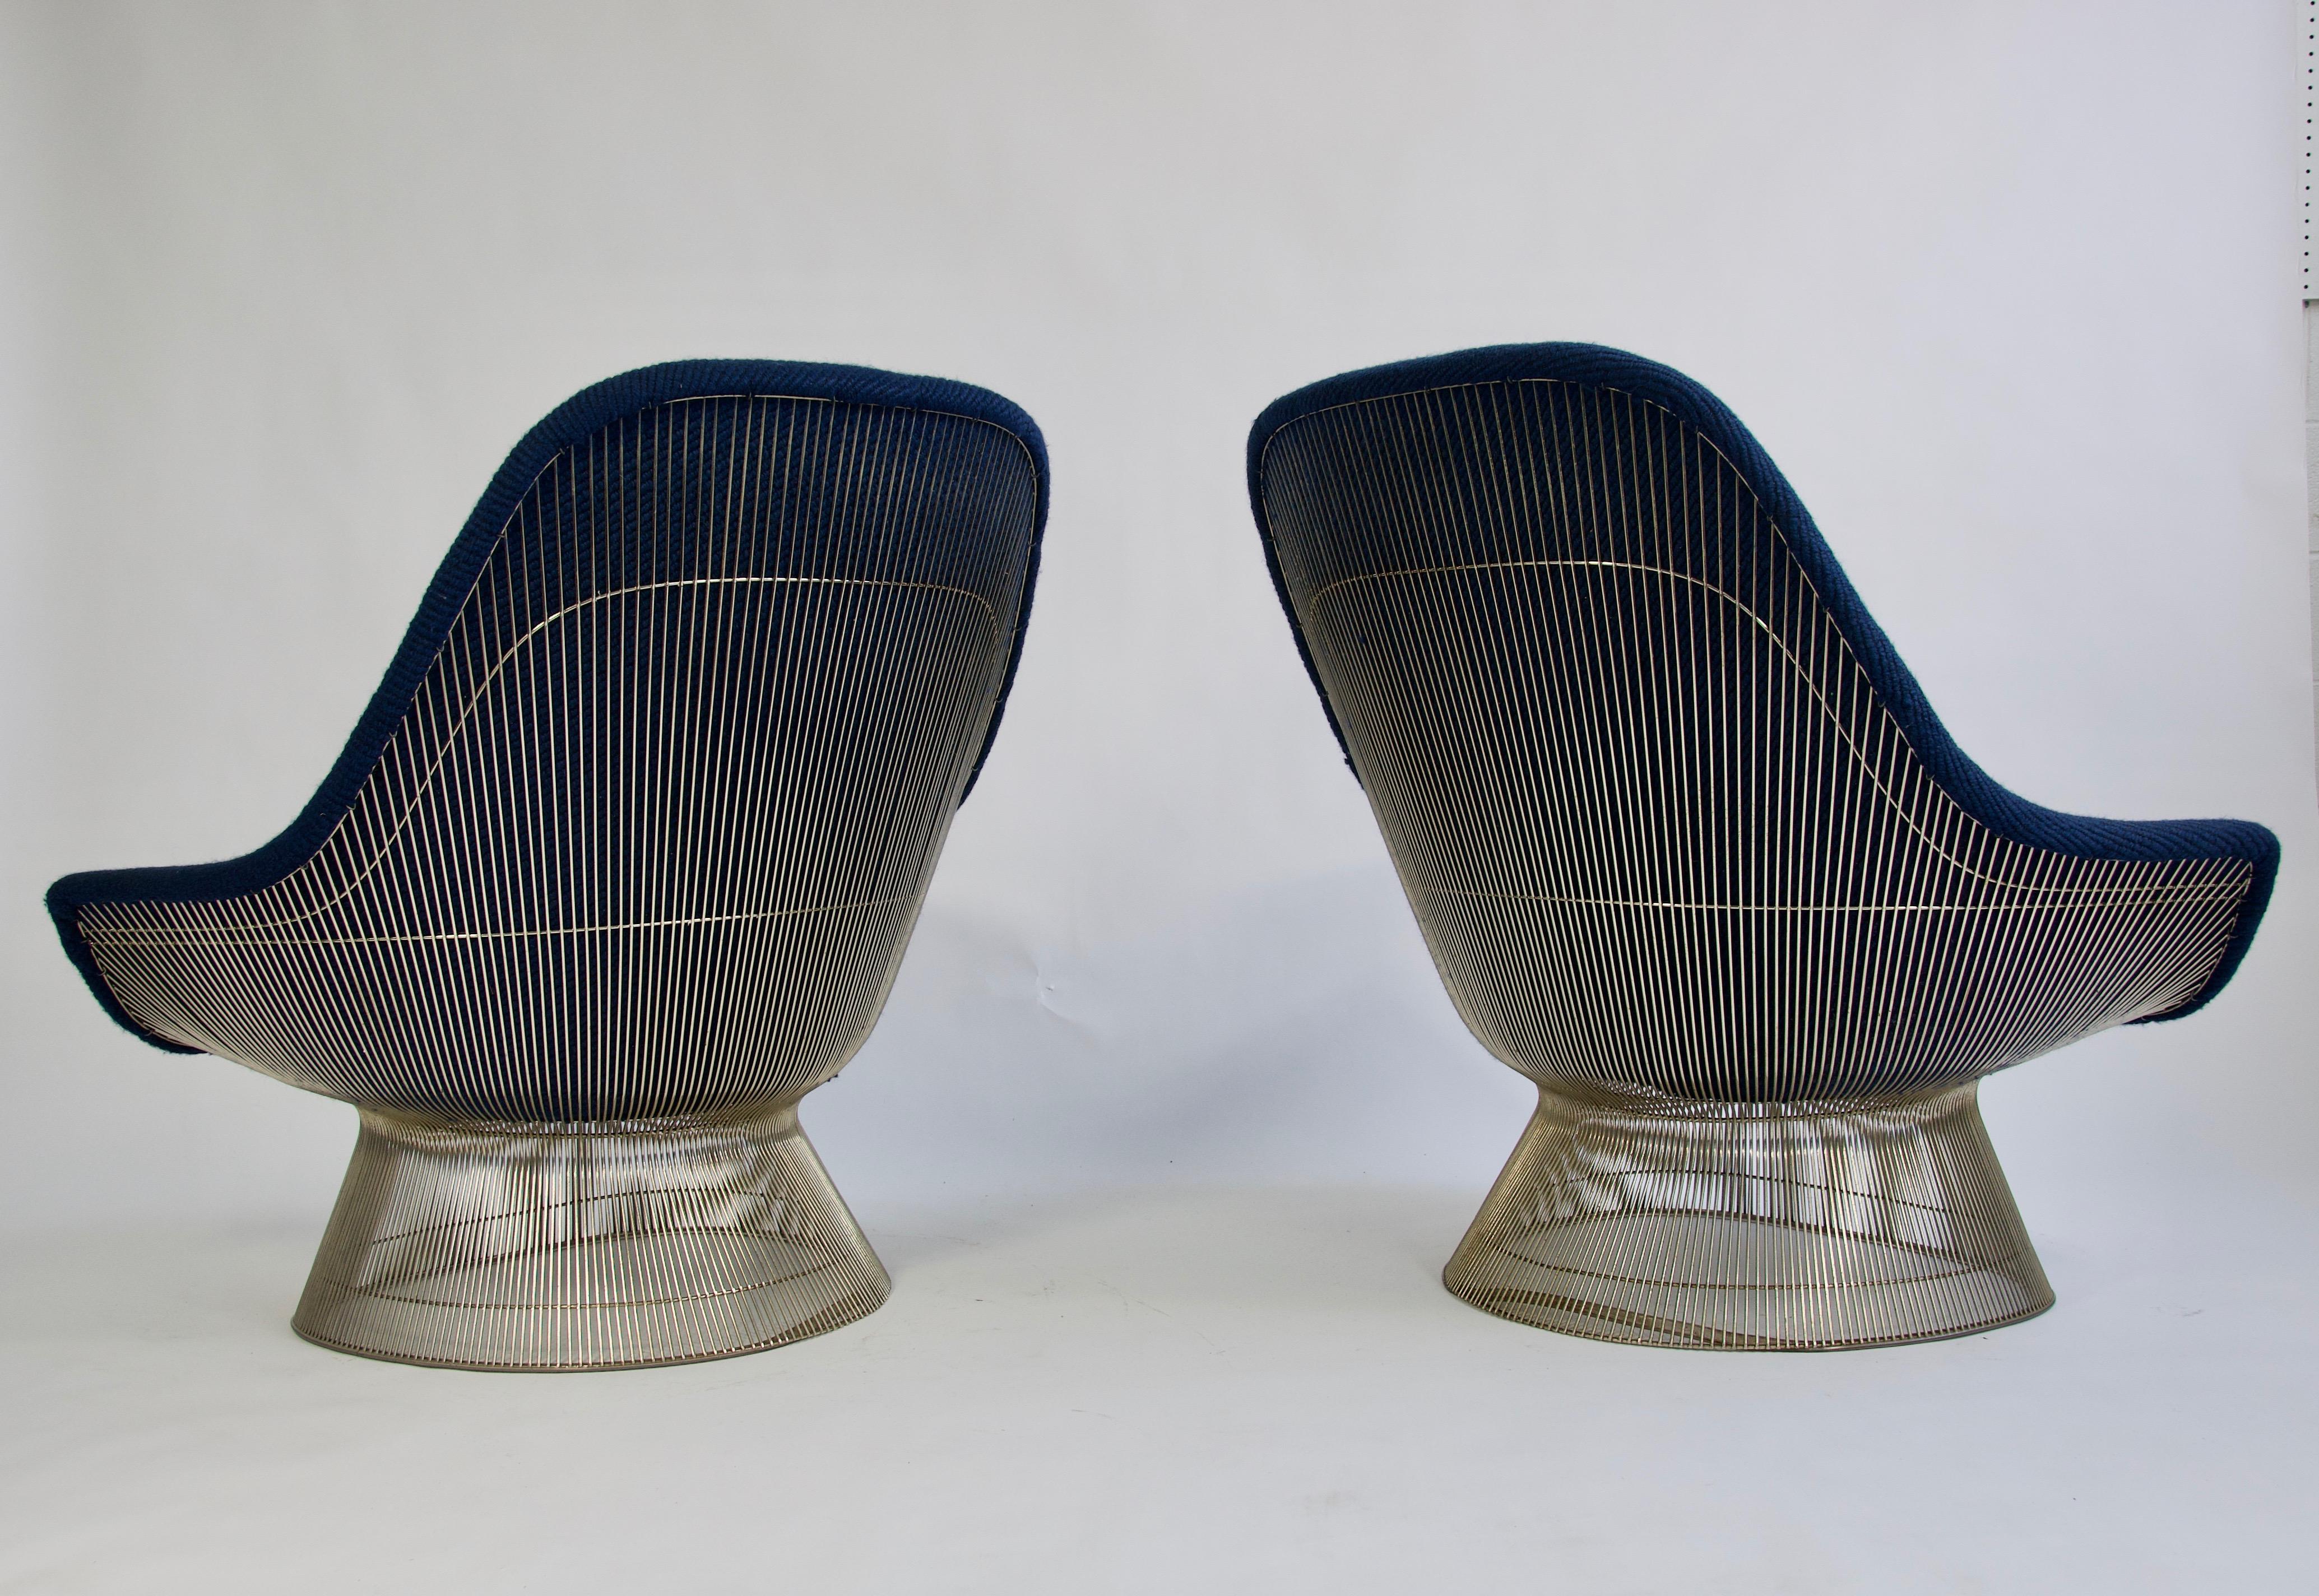 Pair of Warren Platner lounge chairs for Knoll. Nickel finish.